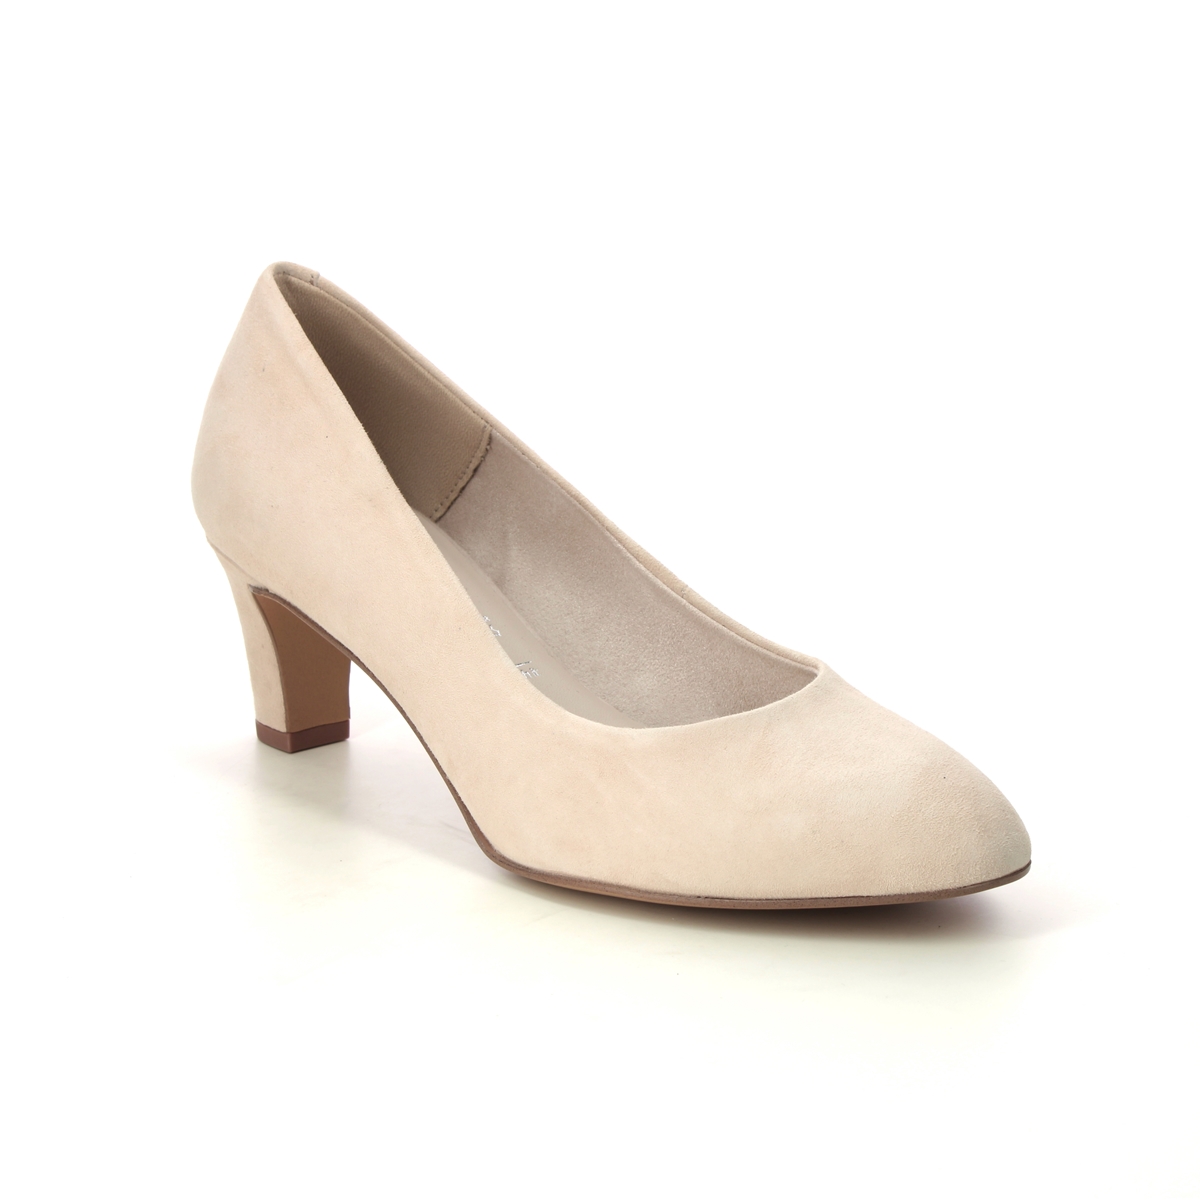 Tamaris Daenerys Nude Suede Womens Court Shoes 22420-42-233 in a Plain Leather in Size 39